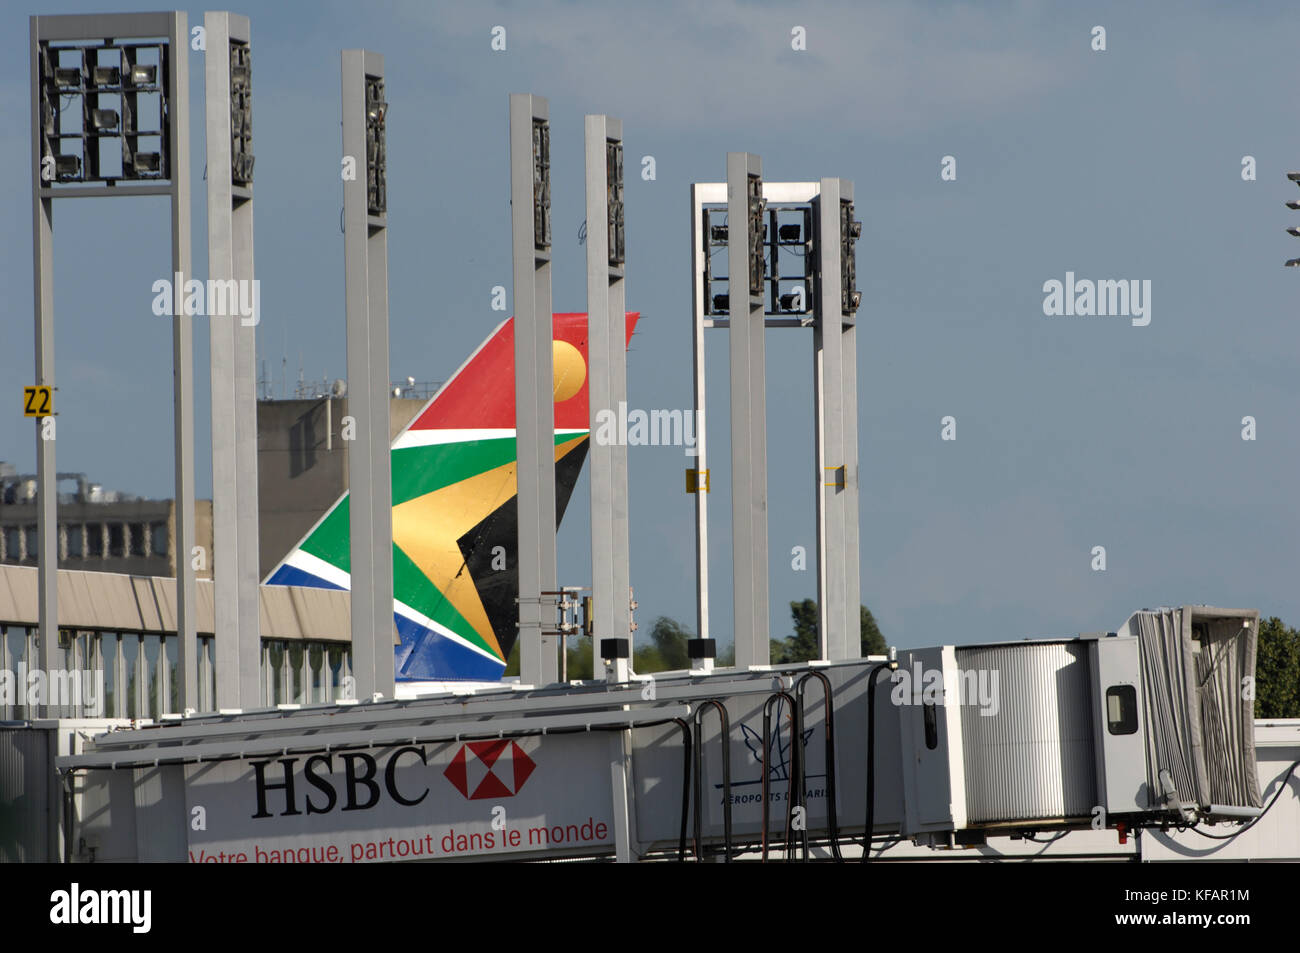 a South African Airways tail and a jetway with HSBC advert Stock Photo